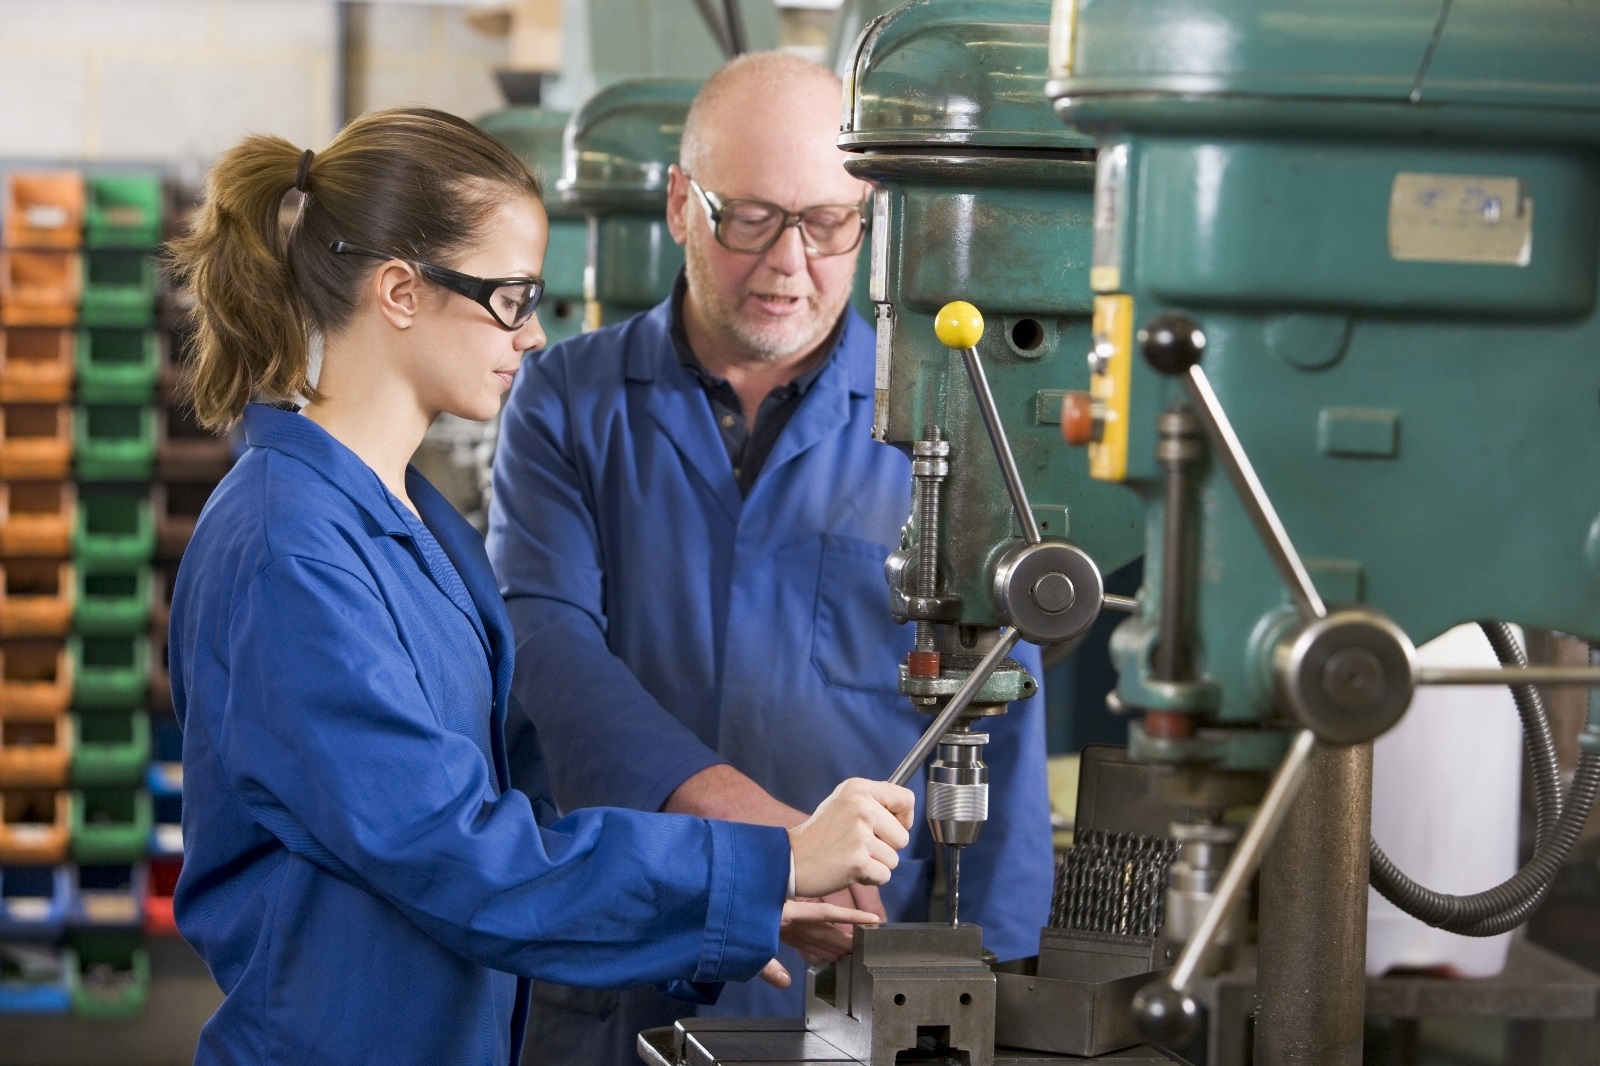 Expanding Apprenticeship Opportunities in the United States